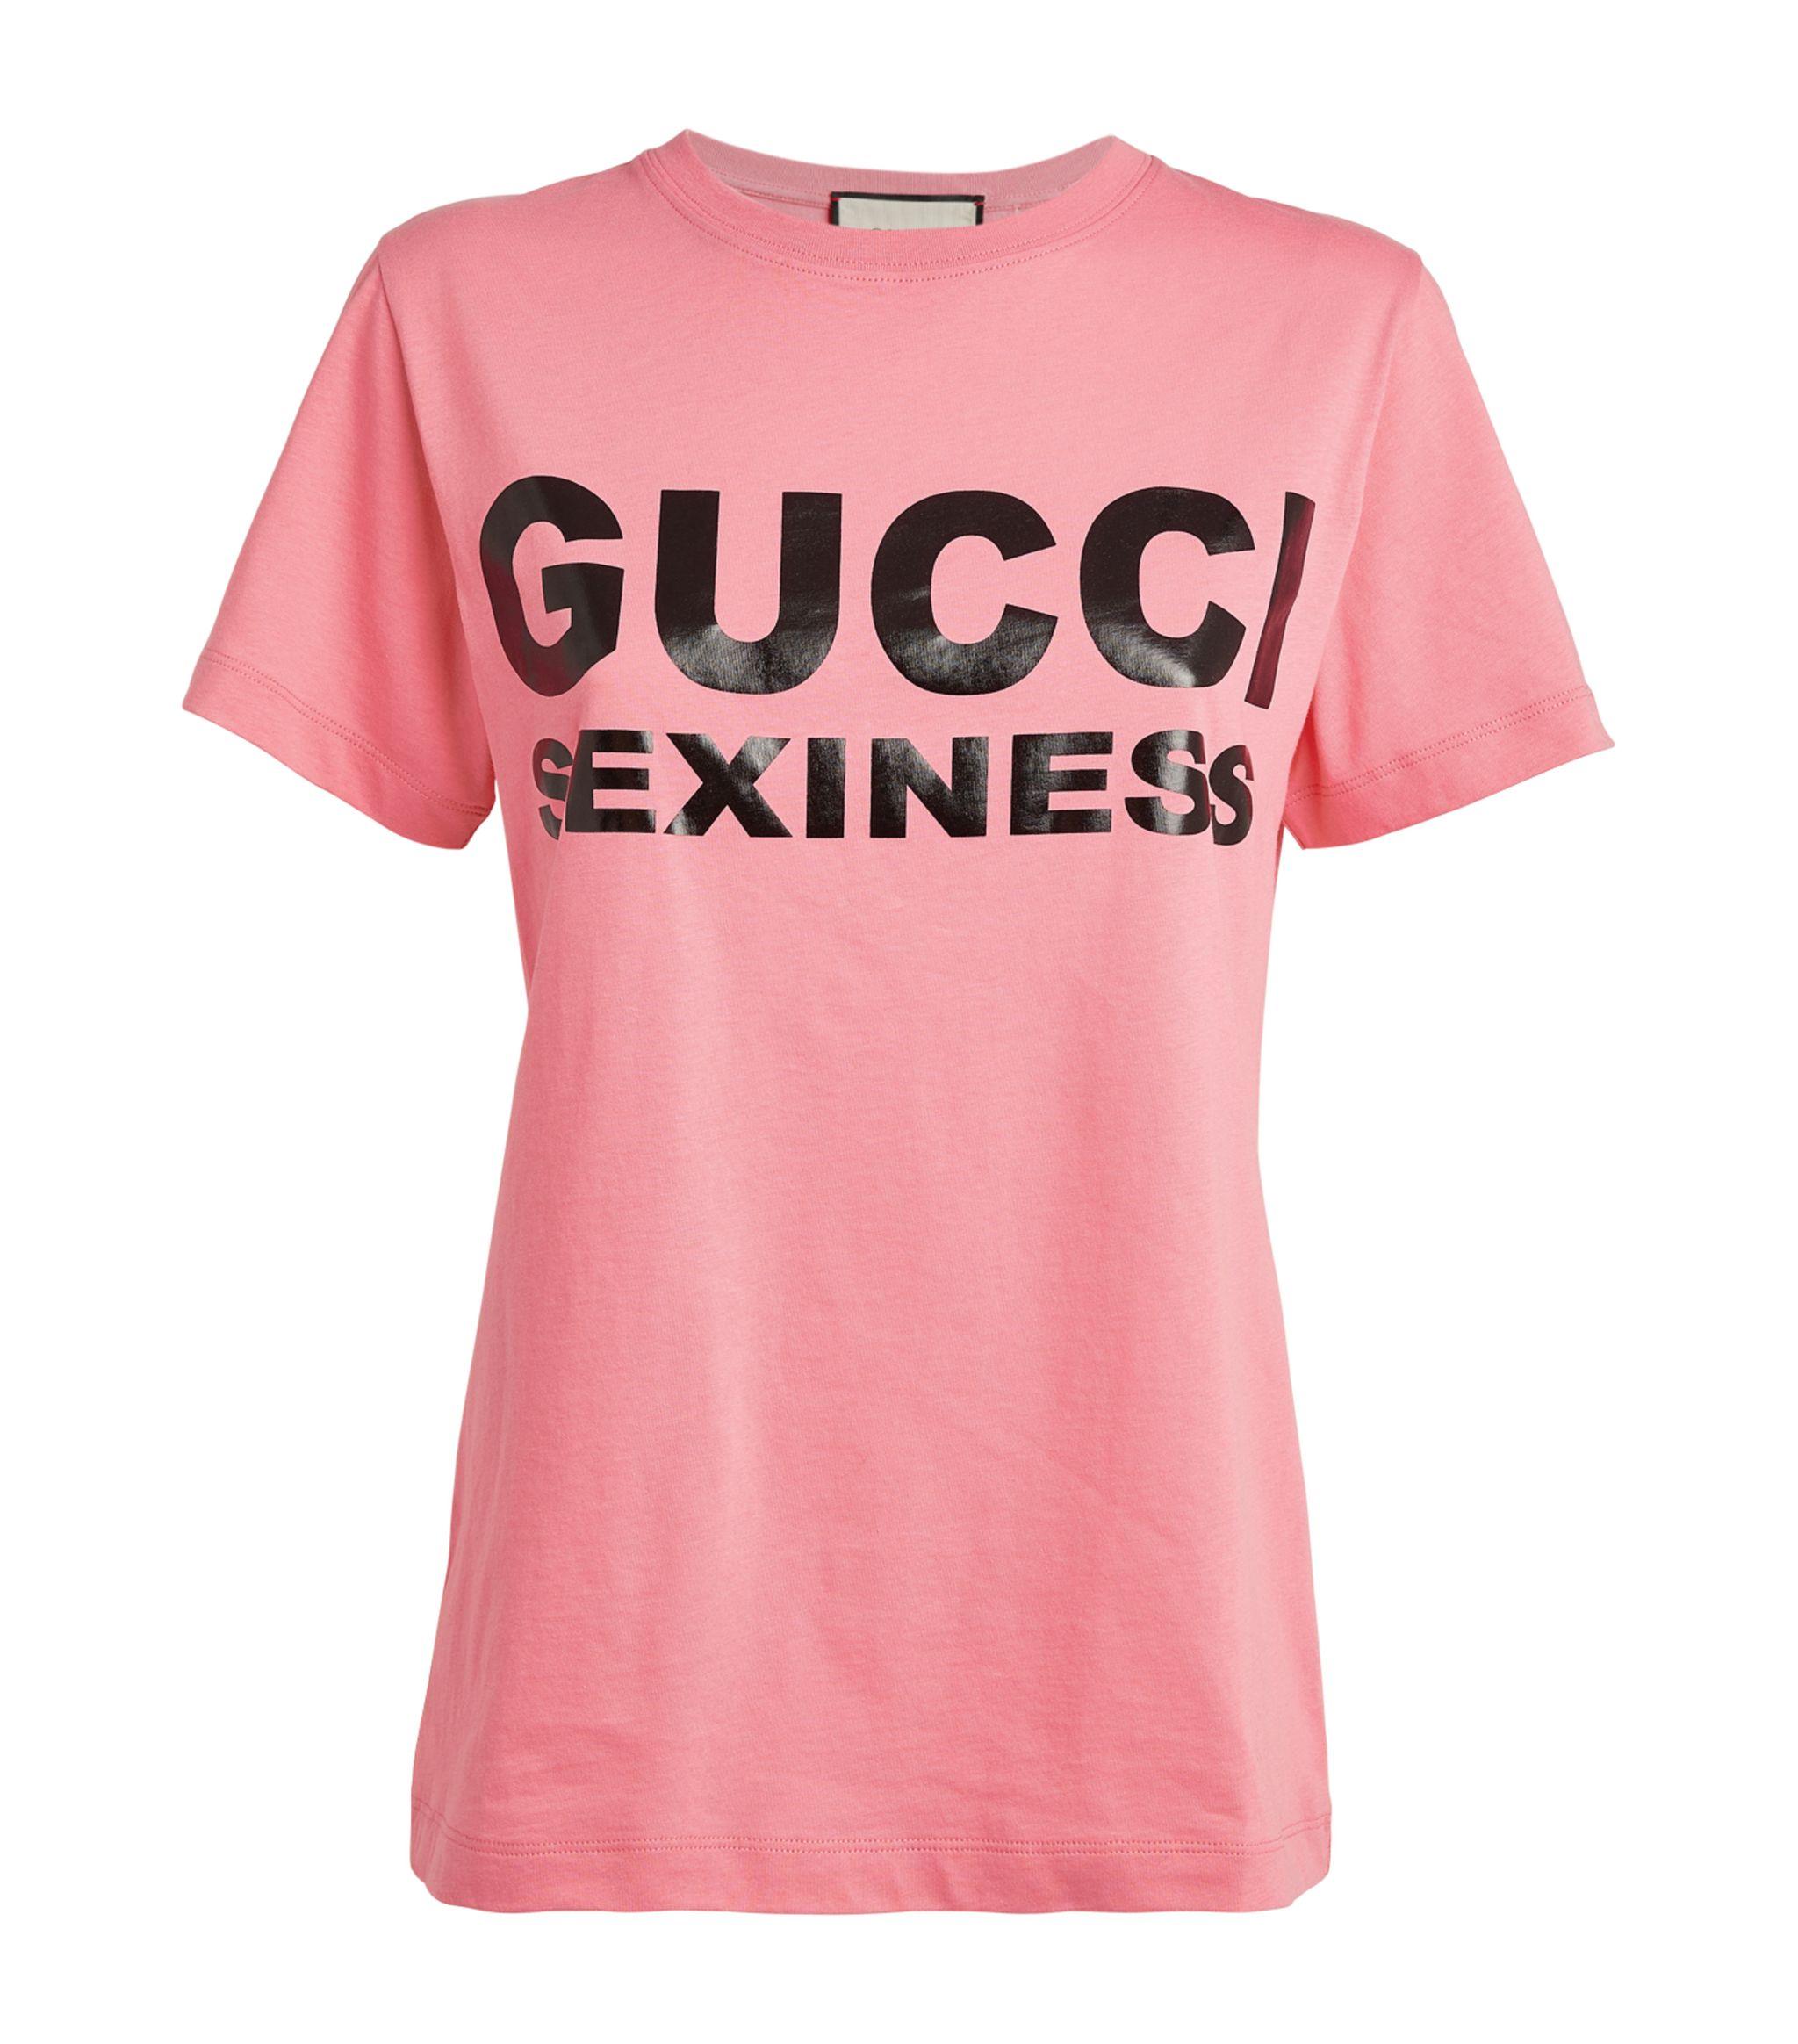 Gucci Leather Sexiness Slogan T-shirt in Pink/Black (Pink) - Save 29% ...